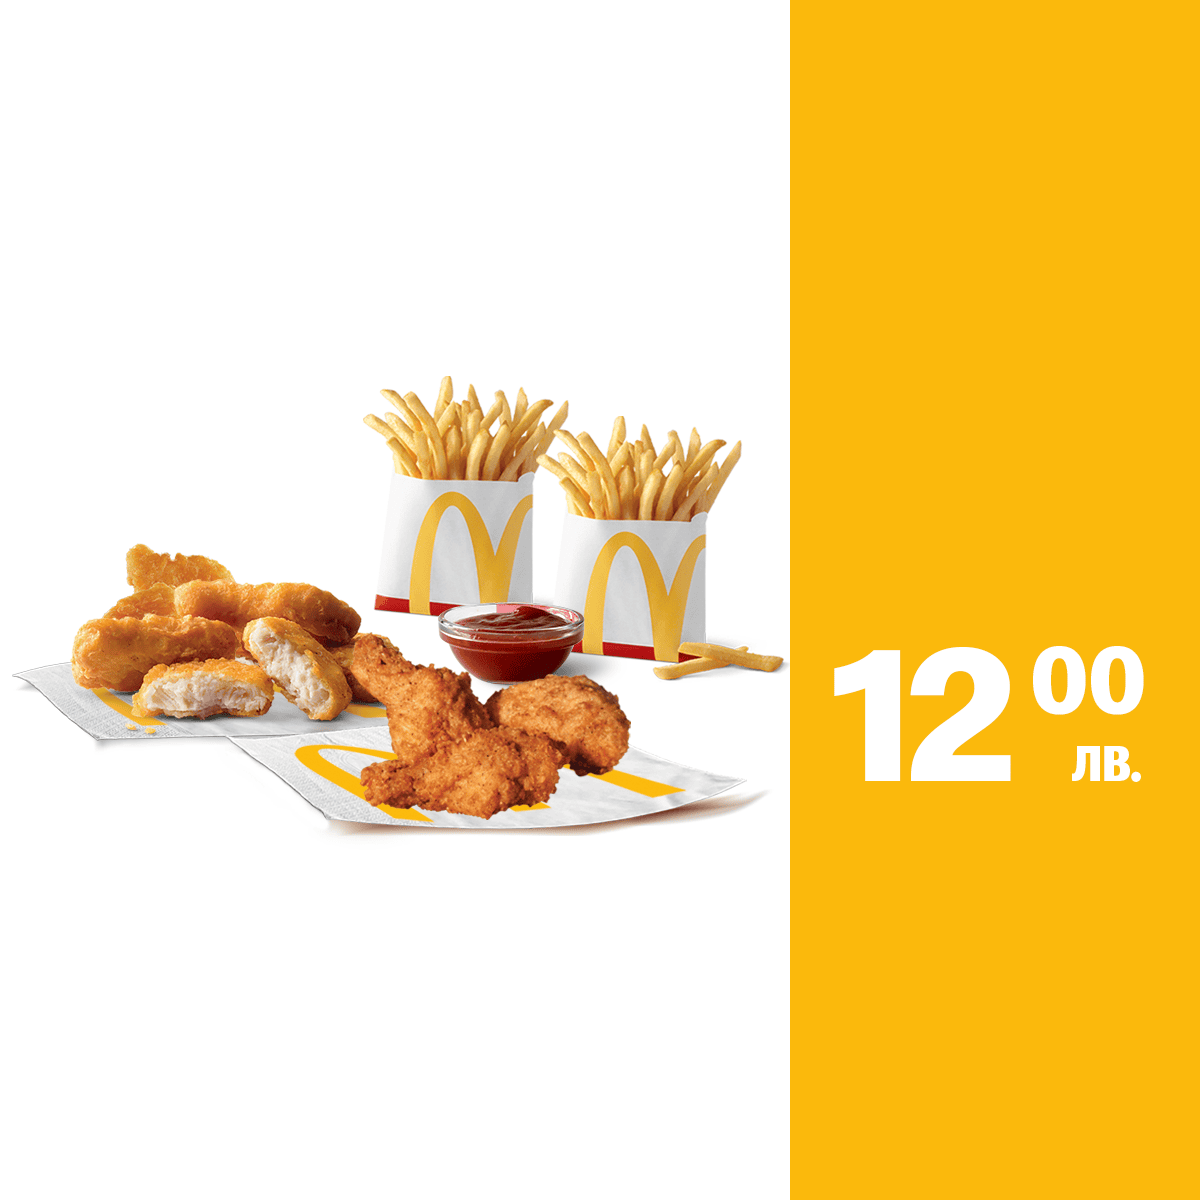 6-chicken-mcnugets-sauce-3-chicken-wings-2x-small-fries (1)